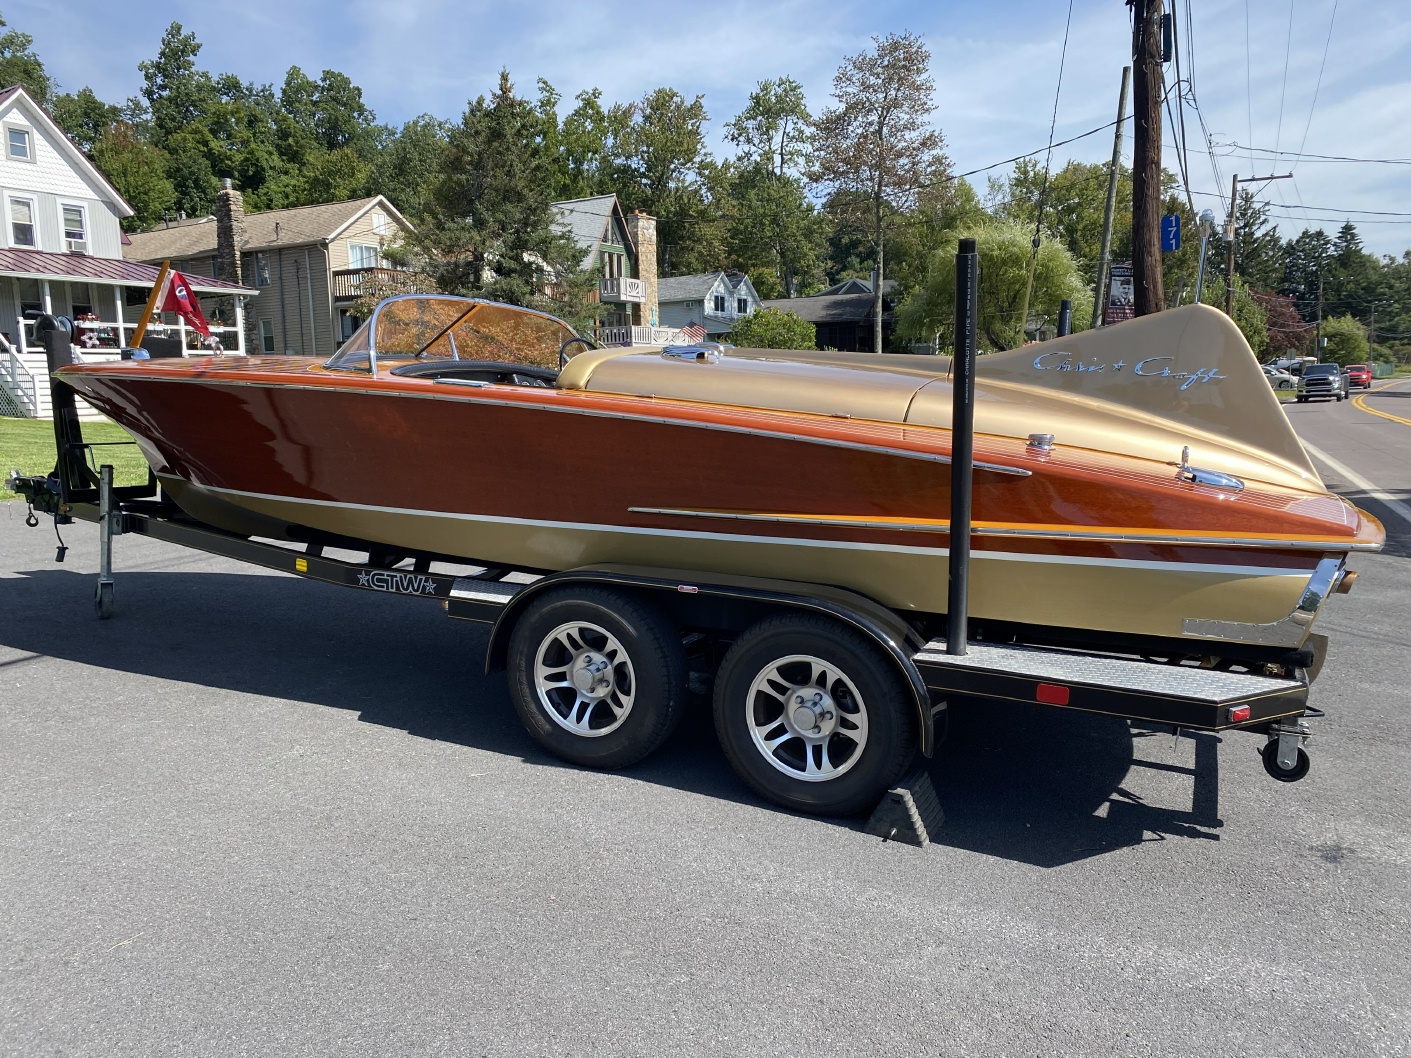 Antique boats for Sale - Last 30 Days